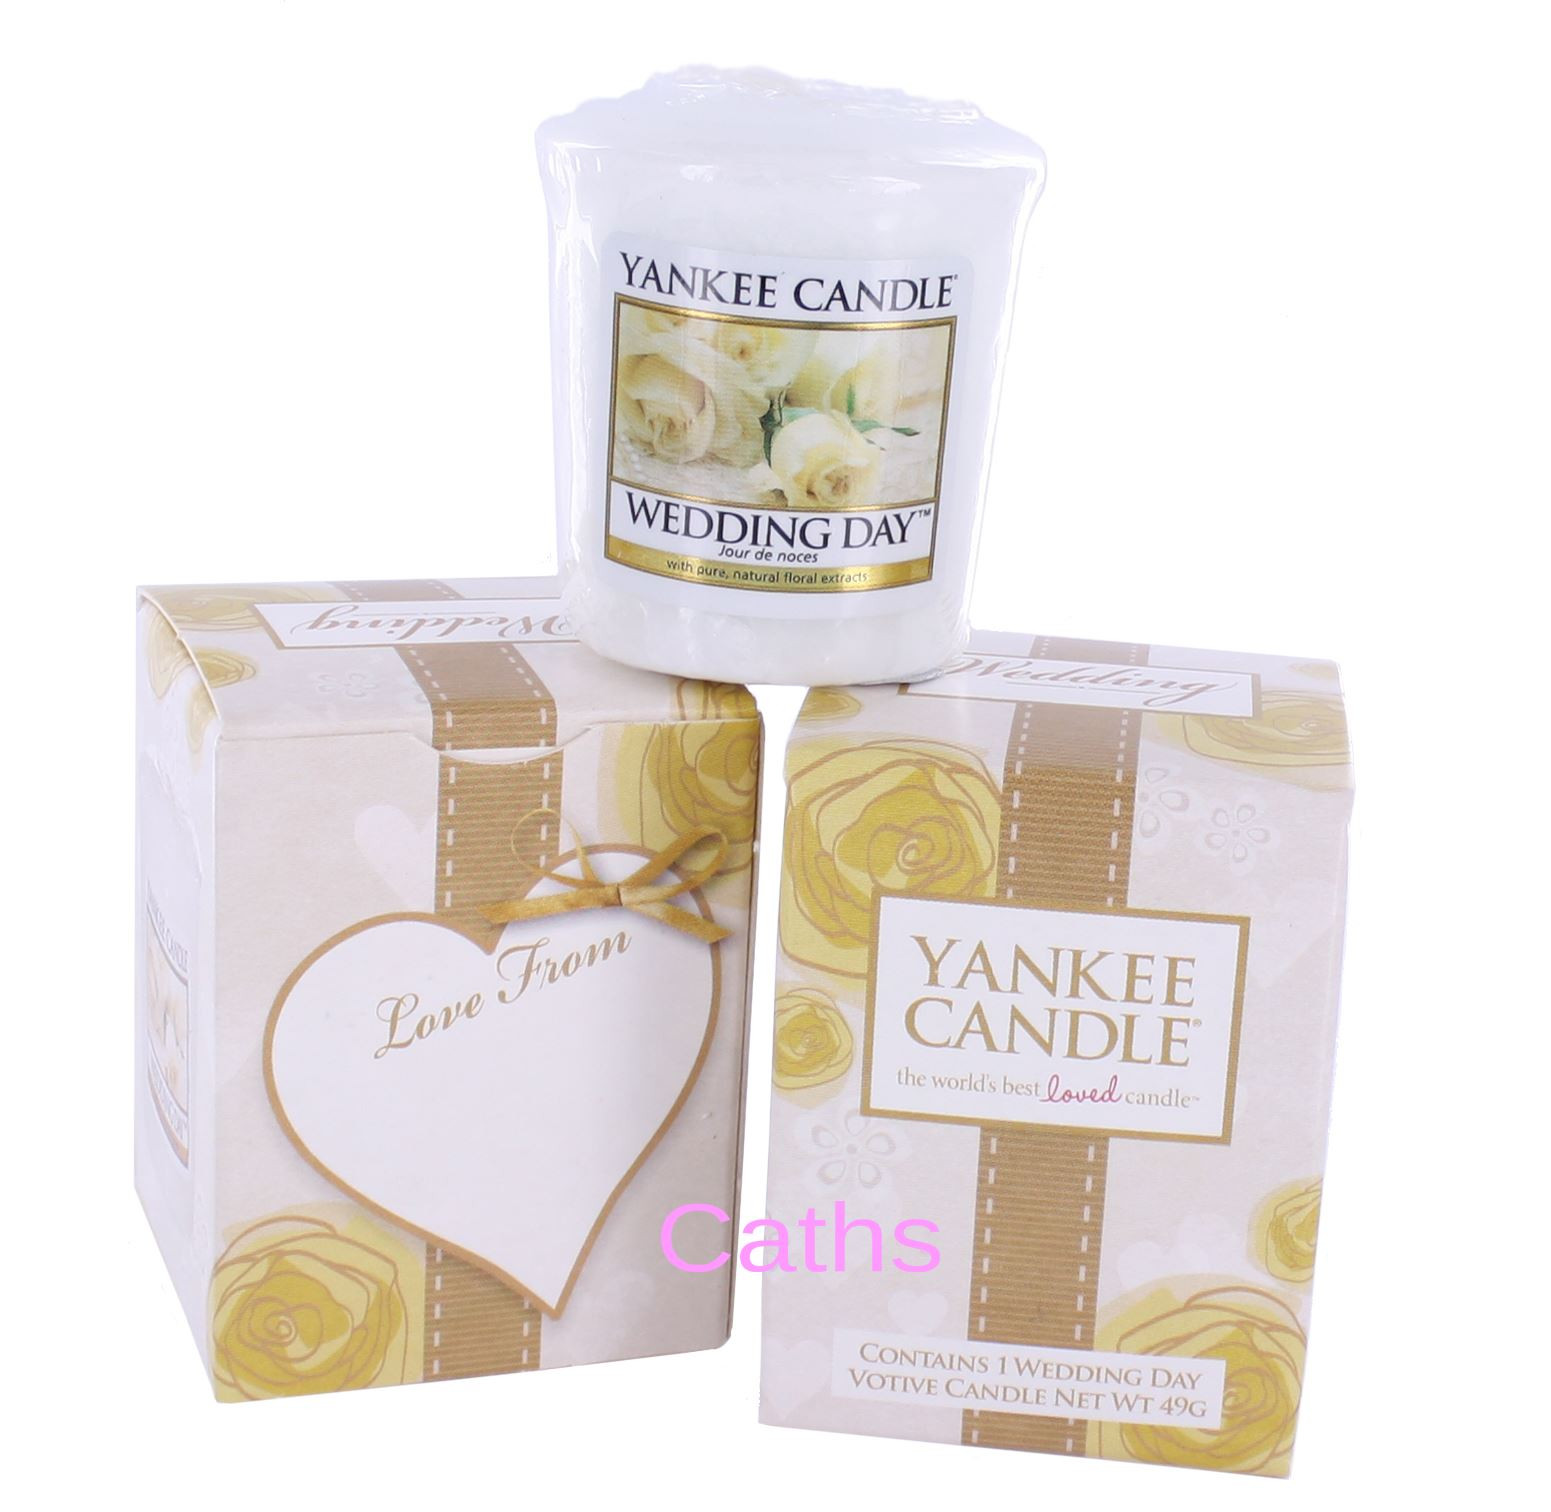 Yankee Candle Wedding Favors
 Yankee Candle Wedding Favour Boxed Wedding Day Votive